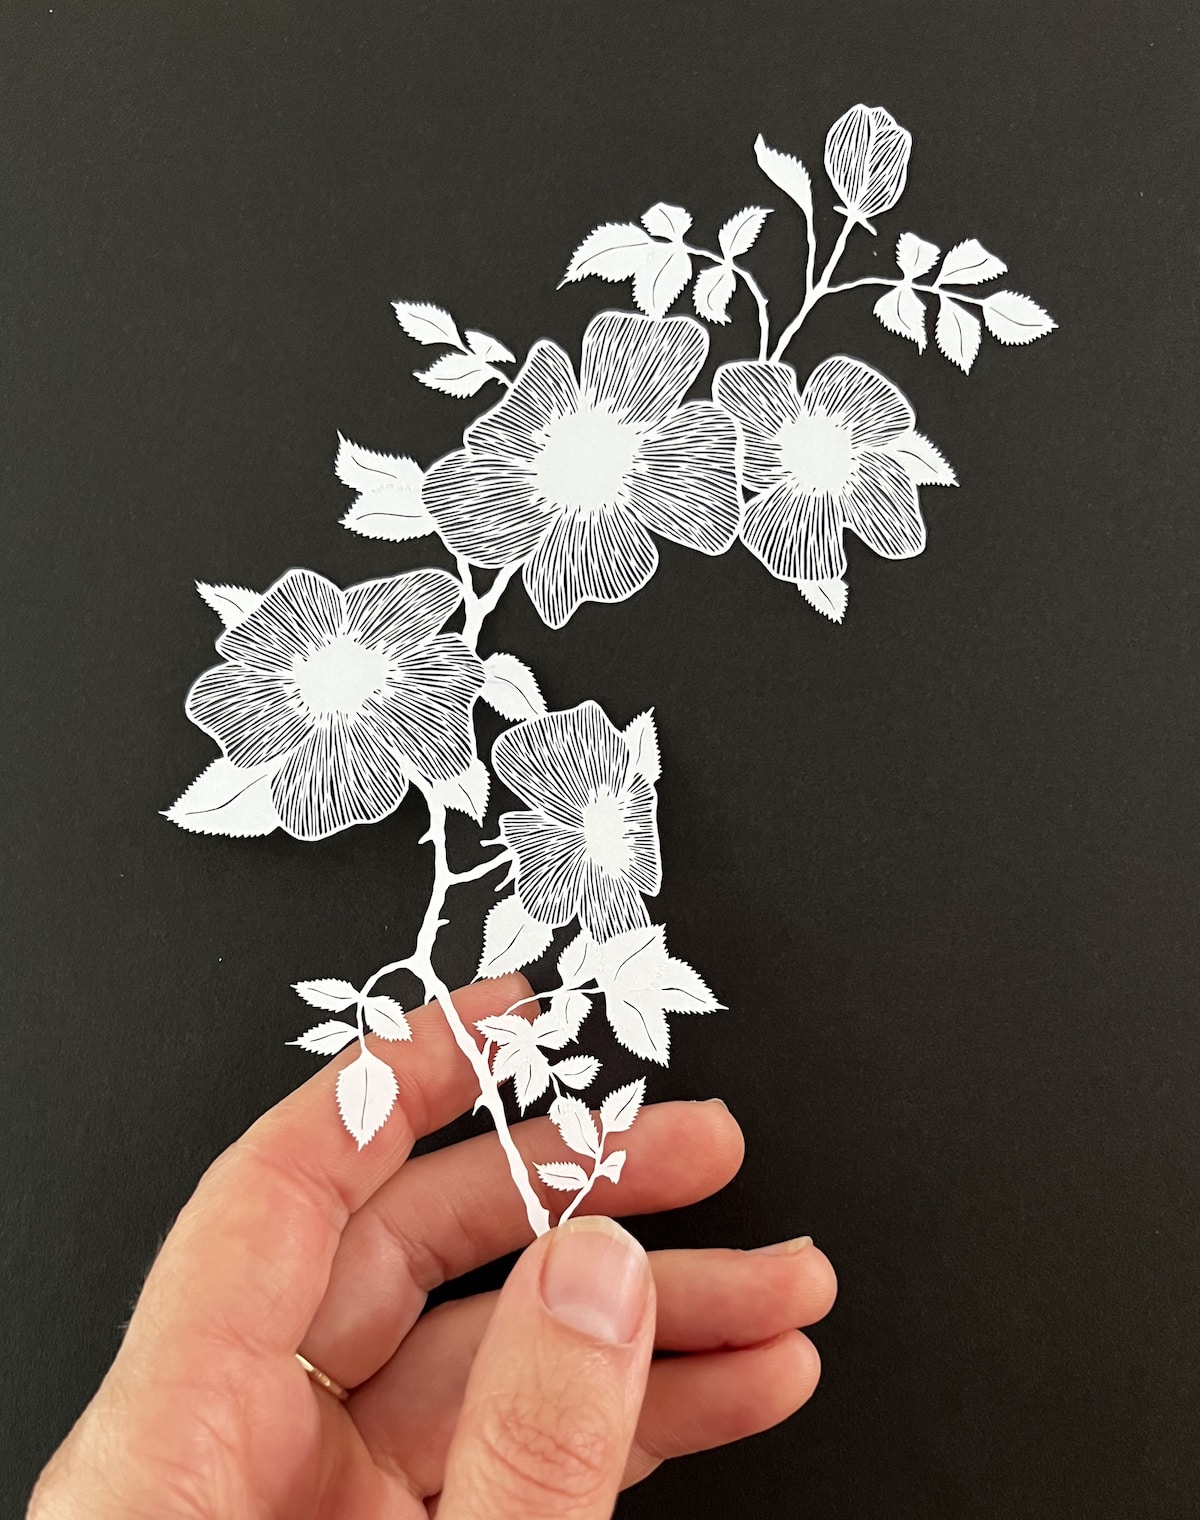 Paper Cut Out Art by Maude White